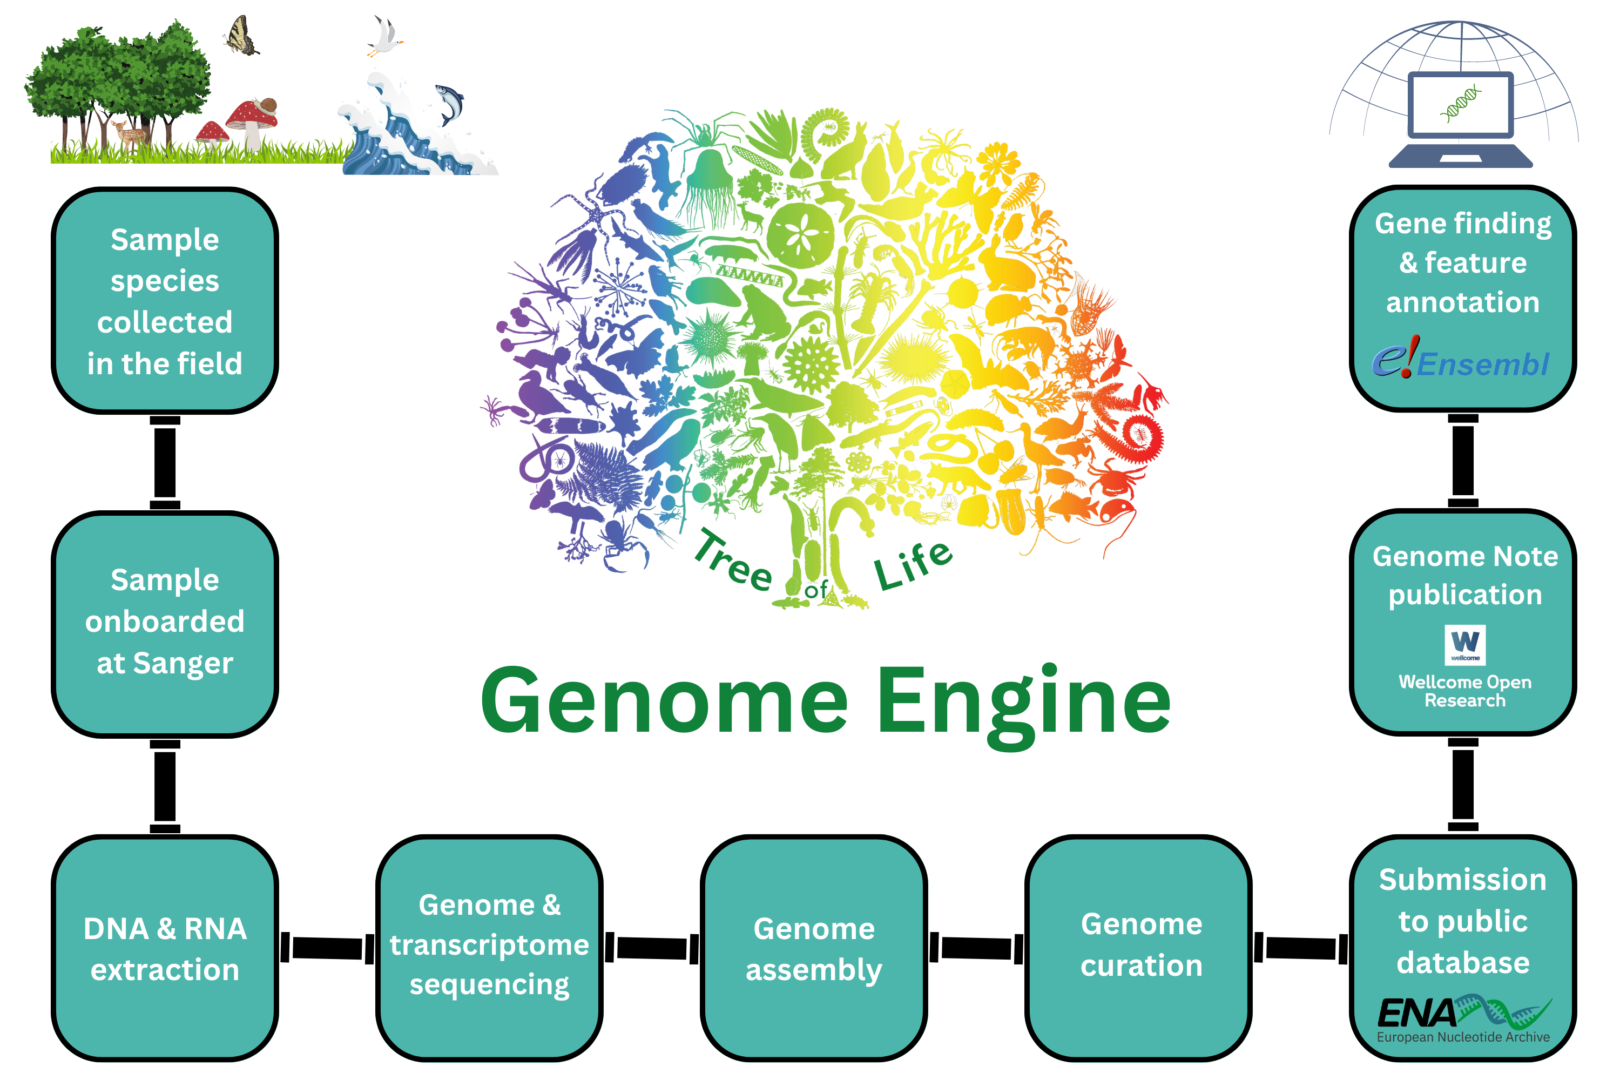 The Tree of Life programme's Genome Engine - The pipeline from sampling to gene identification - 1. Sample collected in the field, 2. Sample onboarded at Sanger, 3. DNA and RNA extraction, 4. Genome and transcriptome sequencing, 5. Genome assembly, 6. Genome curation, 7. Submission to public database (European Nucleotide Archive - ENA), 8. Genome Note publication on Wellcome Open Research, 9. Gene finding and feature annotation on the Ensembl database